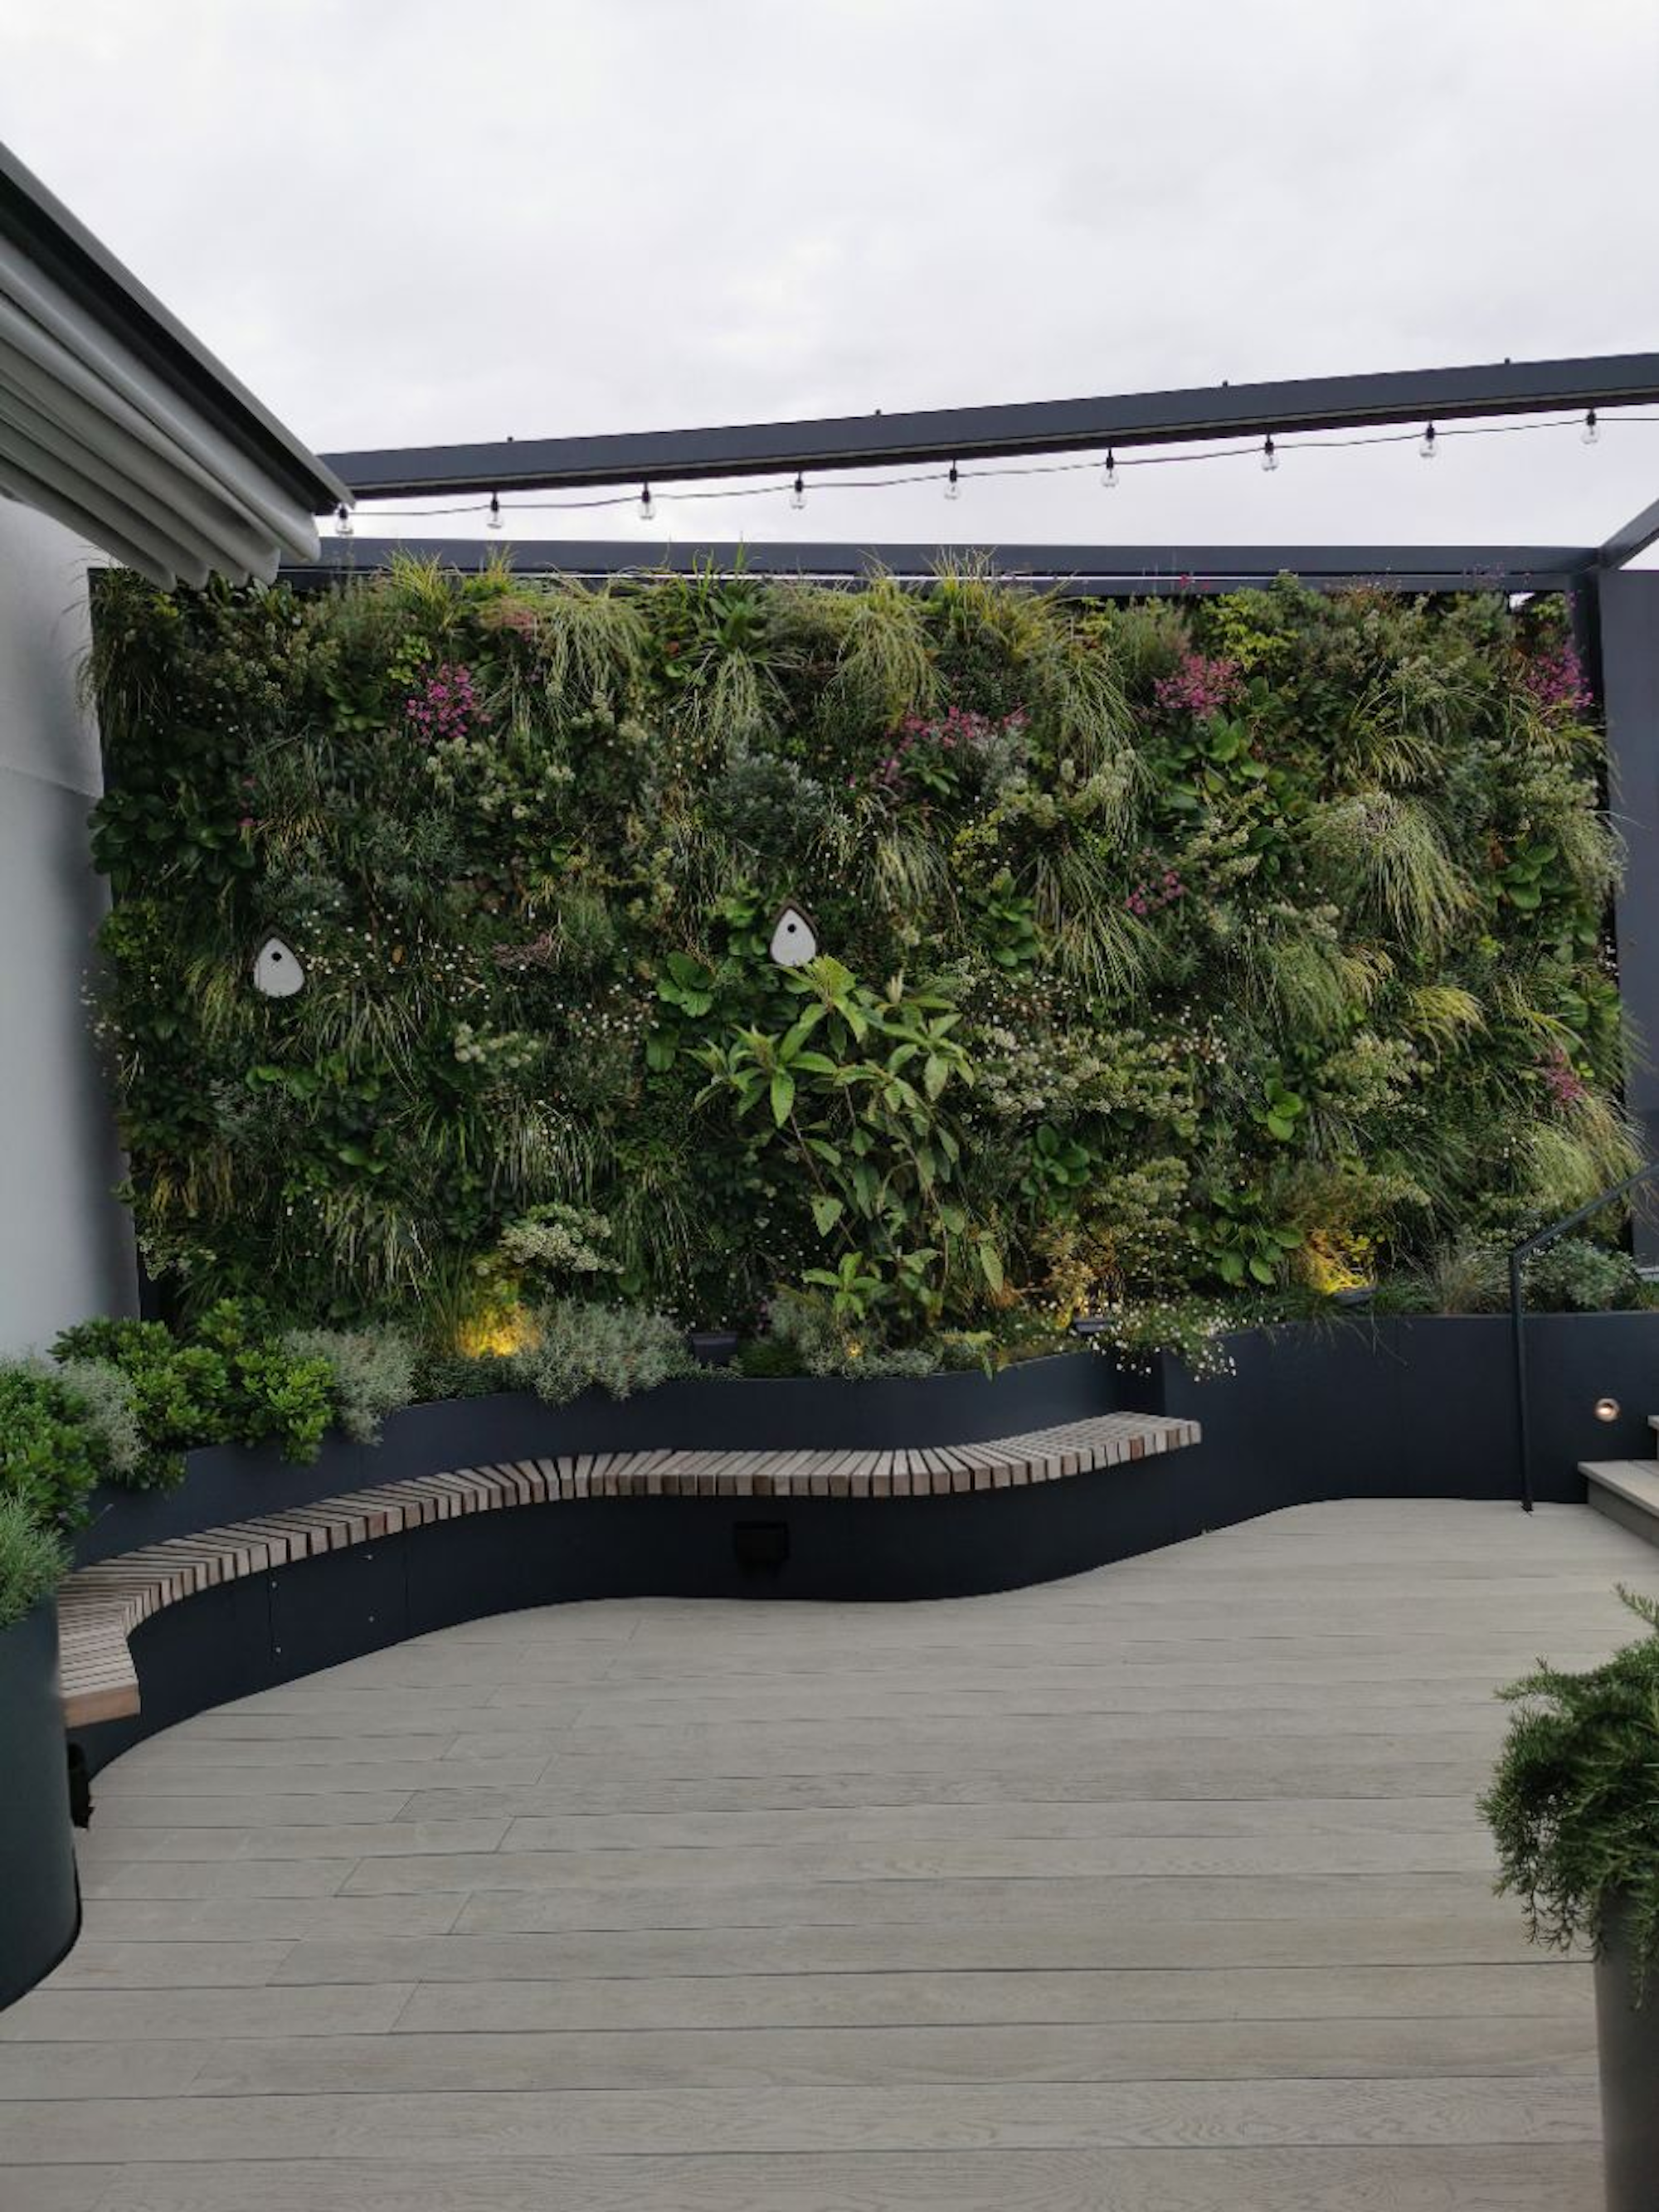 roof terrace with planters, seating and a living wall with flowers and bird boxes